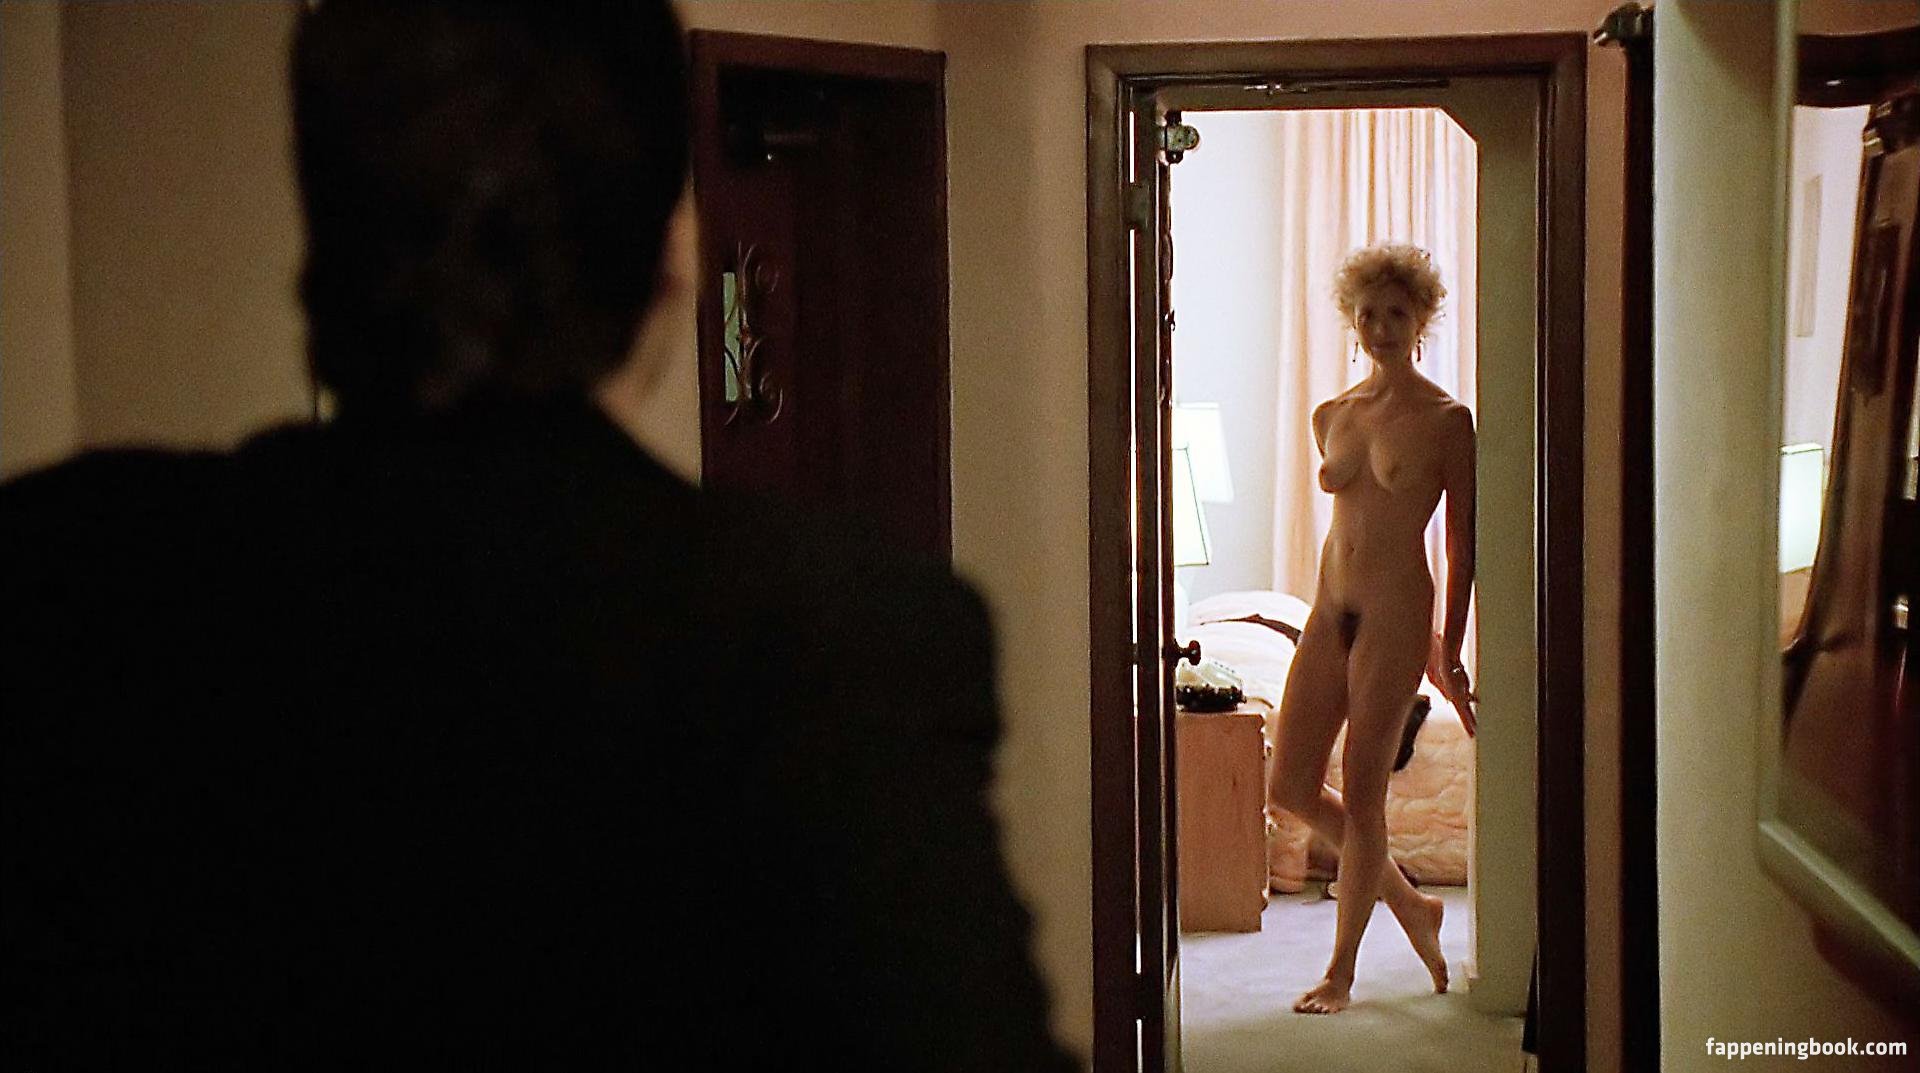 Annette Bening Nude, The Fappening - Photo #45053 - FappeningBook.